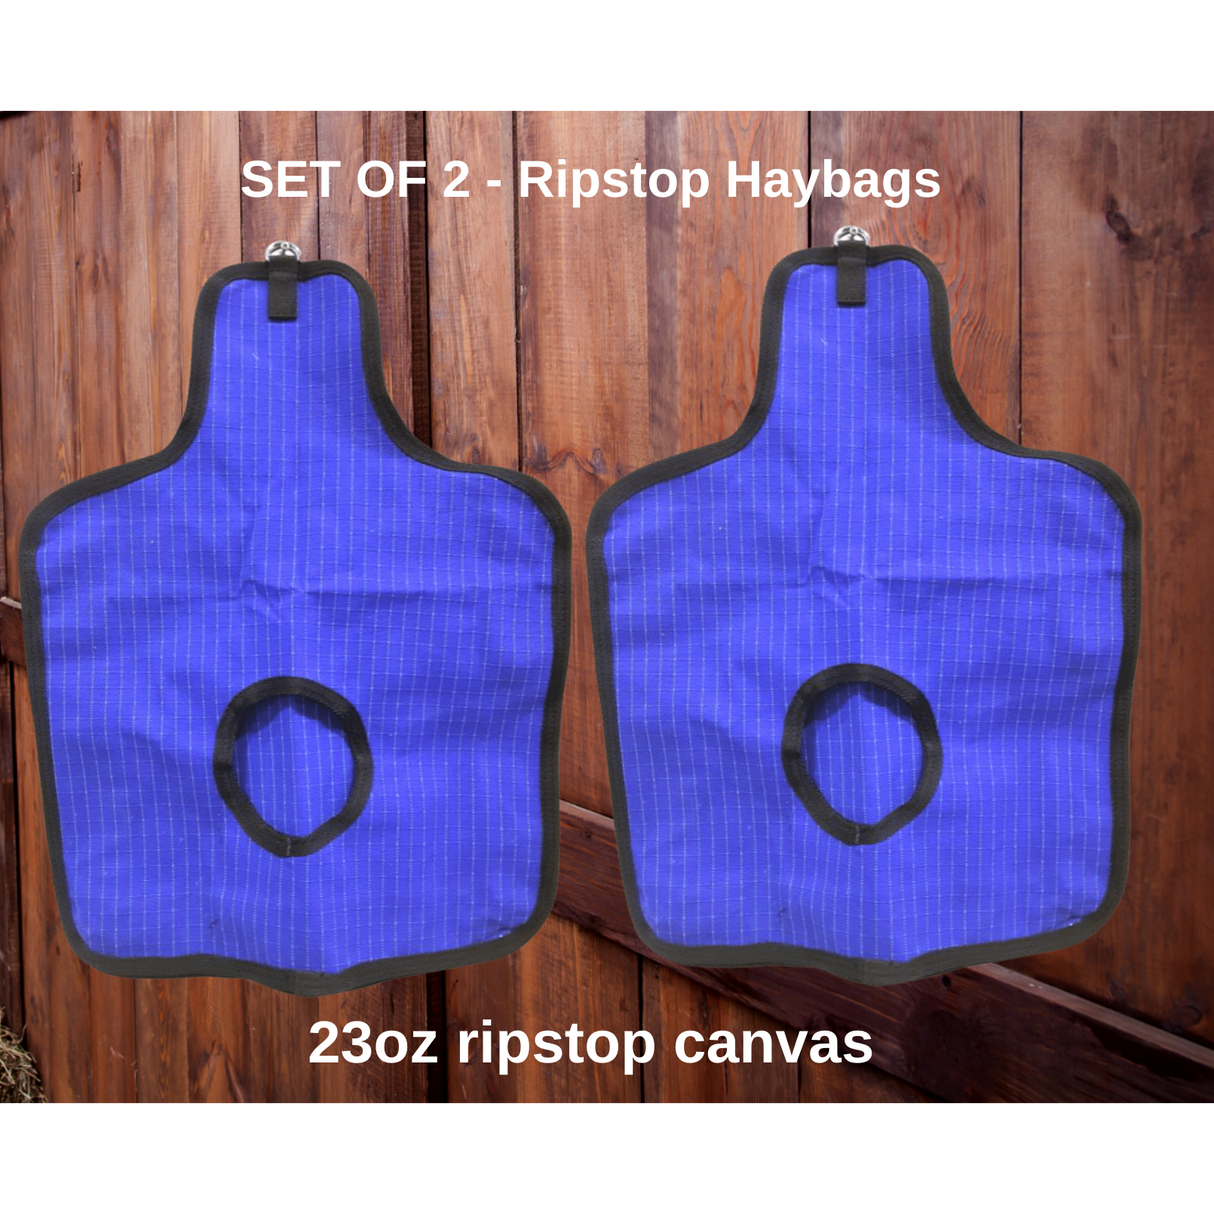 Ripstop Haybags - Set of 2 - ProHorse